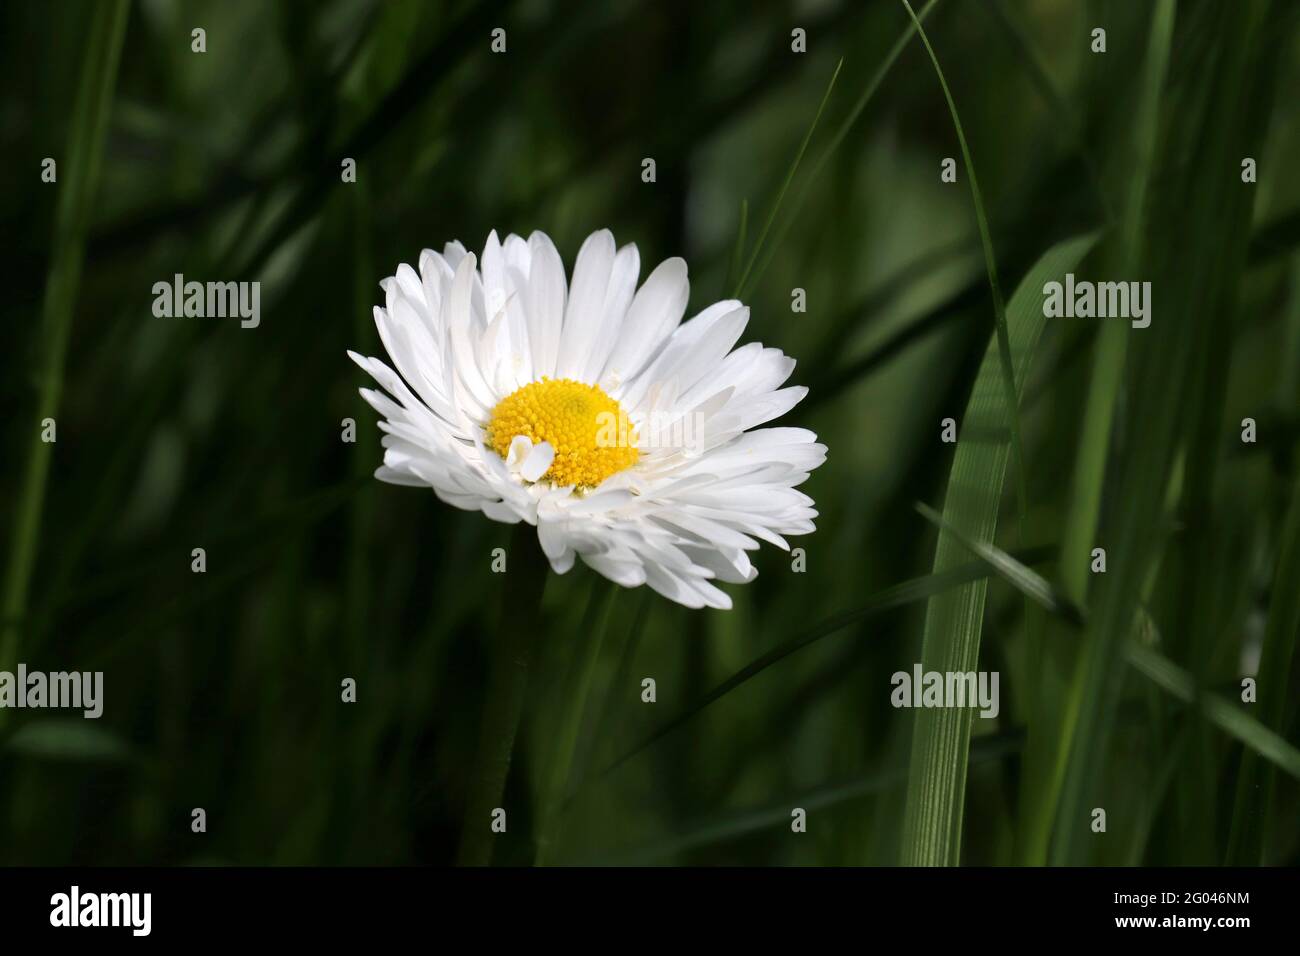 Summer meadow with white daisy flower in green grass. Floral background with chamomile, beauty of nature Stock Photo